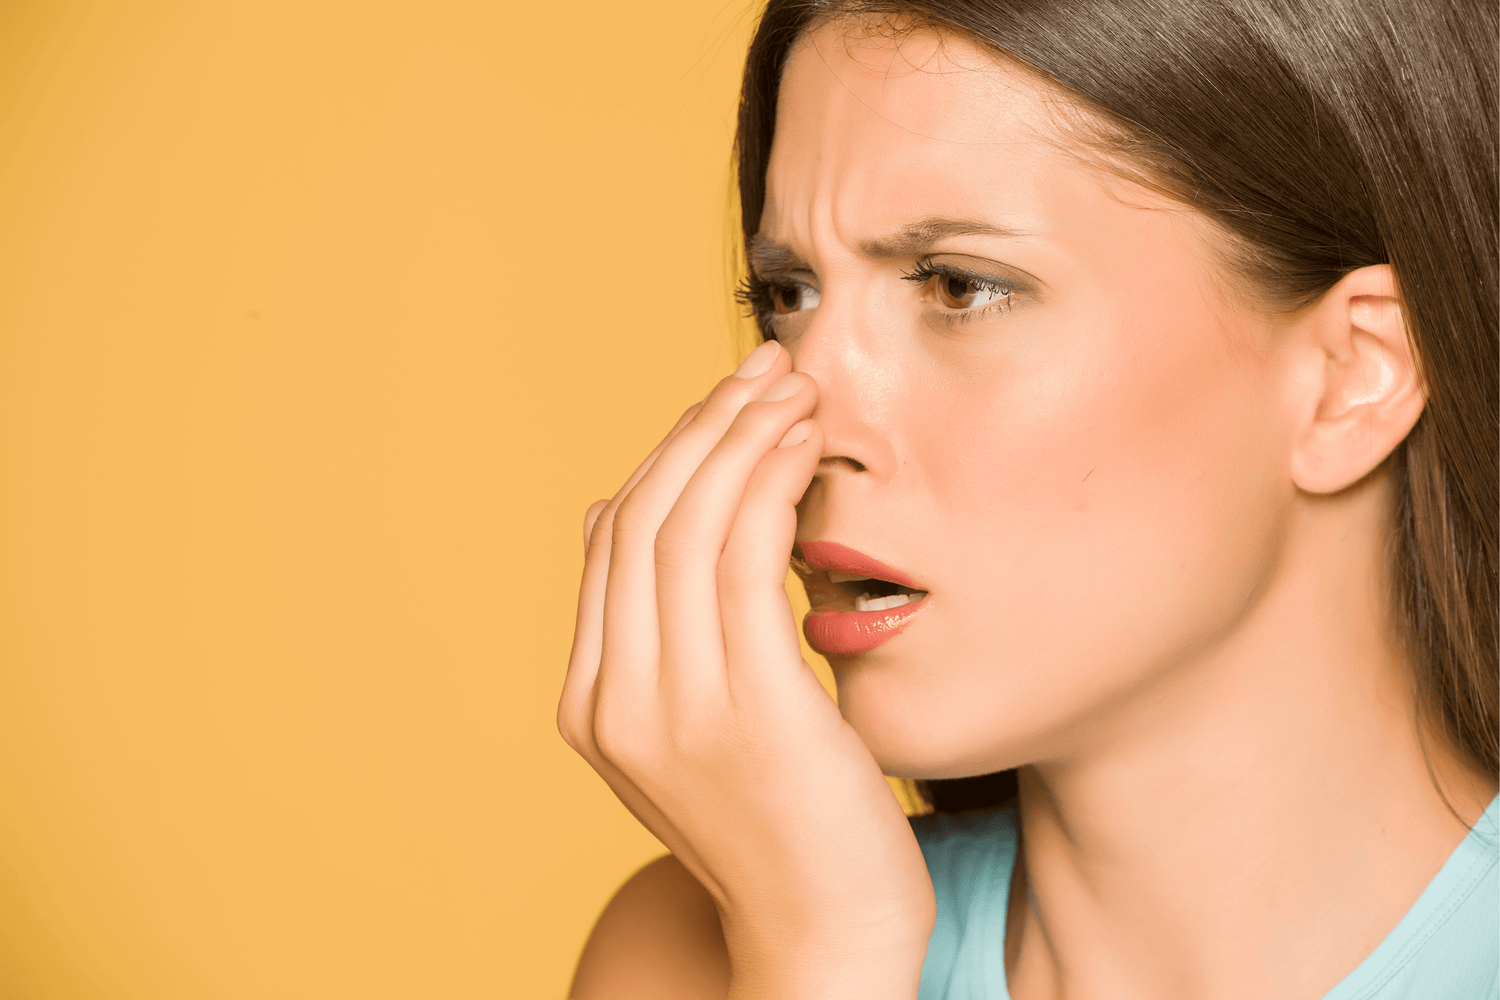 How to Smell Your Own Breath (It Stinks More than You Think)